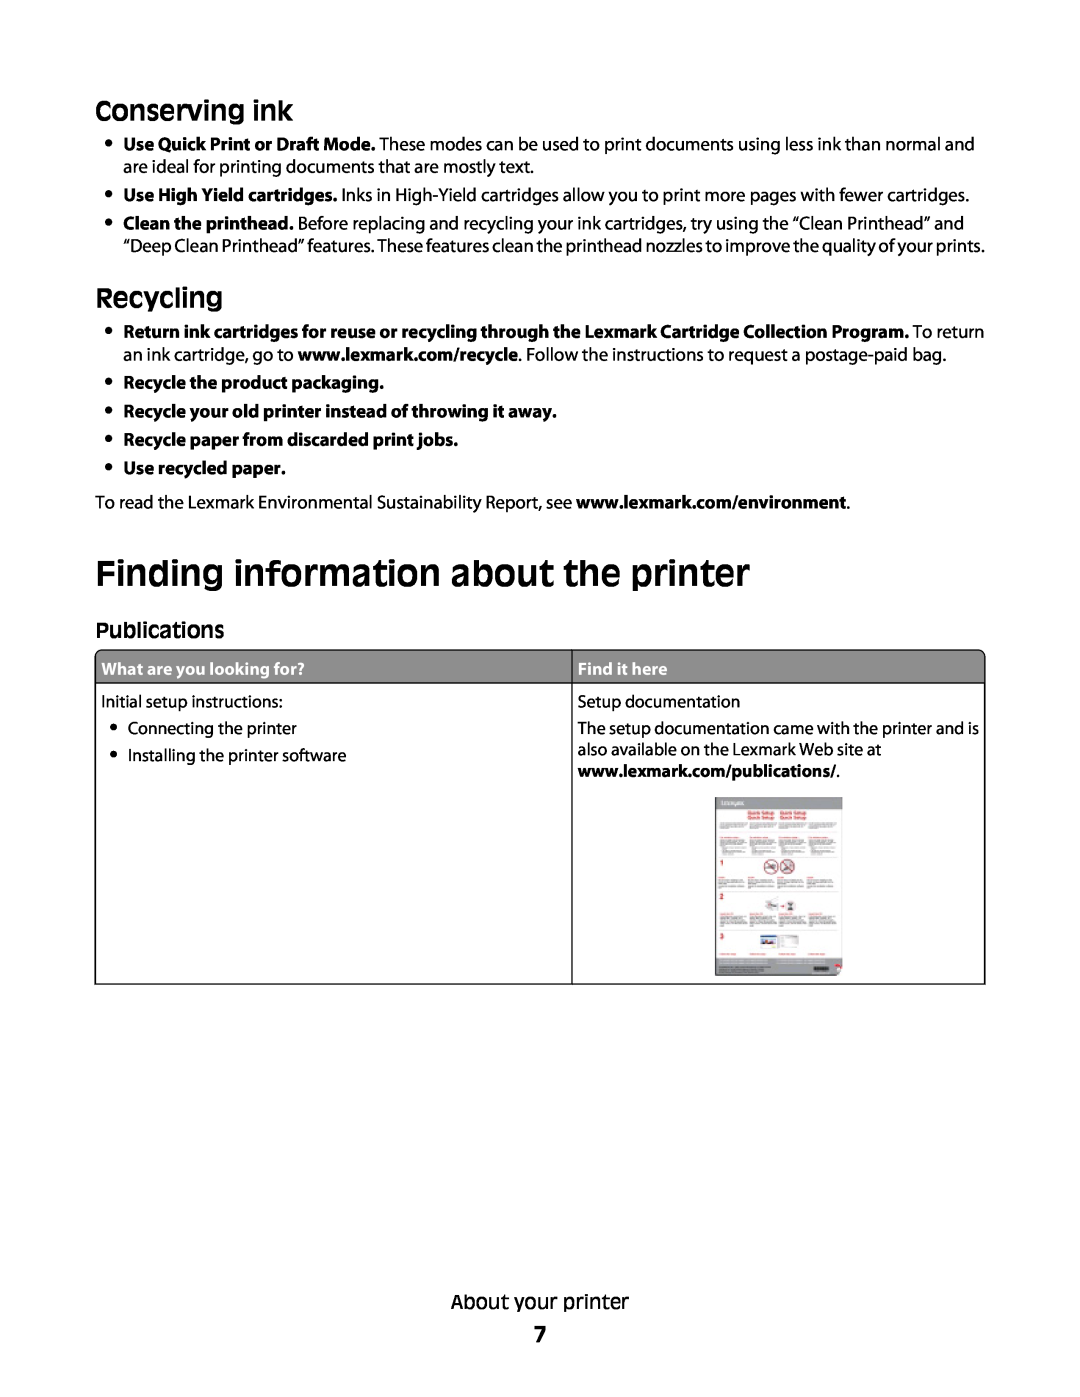 Lexmark 30E Finding information about the printer, Conserving ink, Recycling, Publications, Recycle the product packaging 